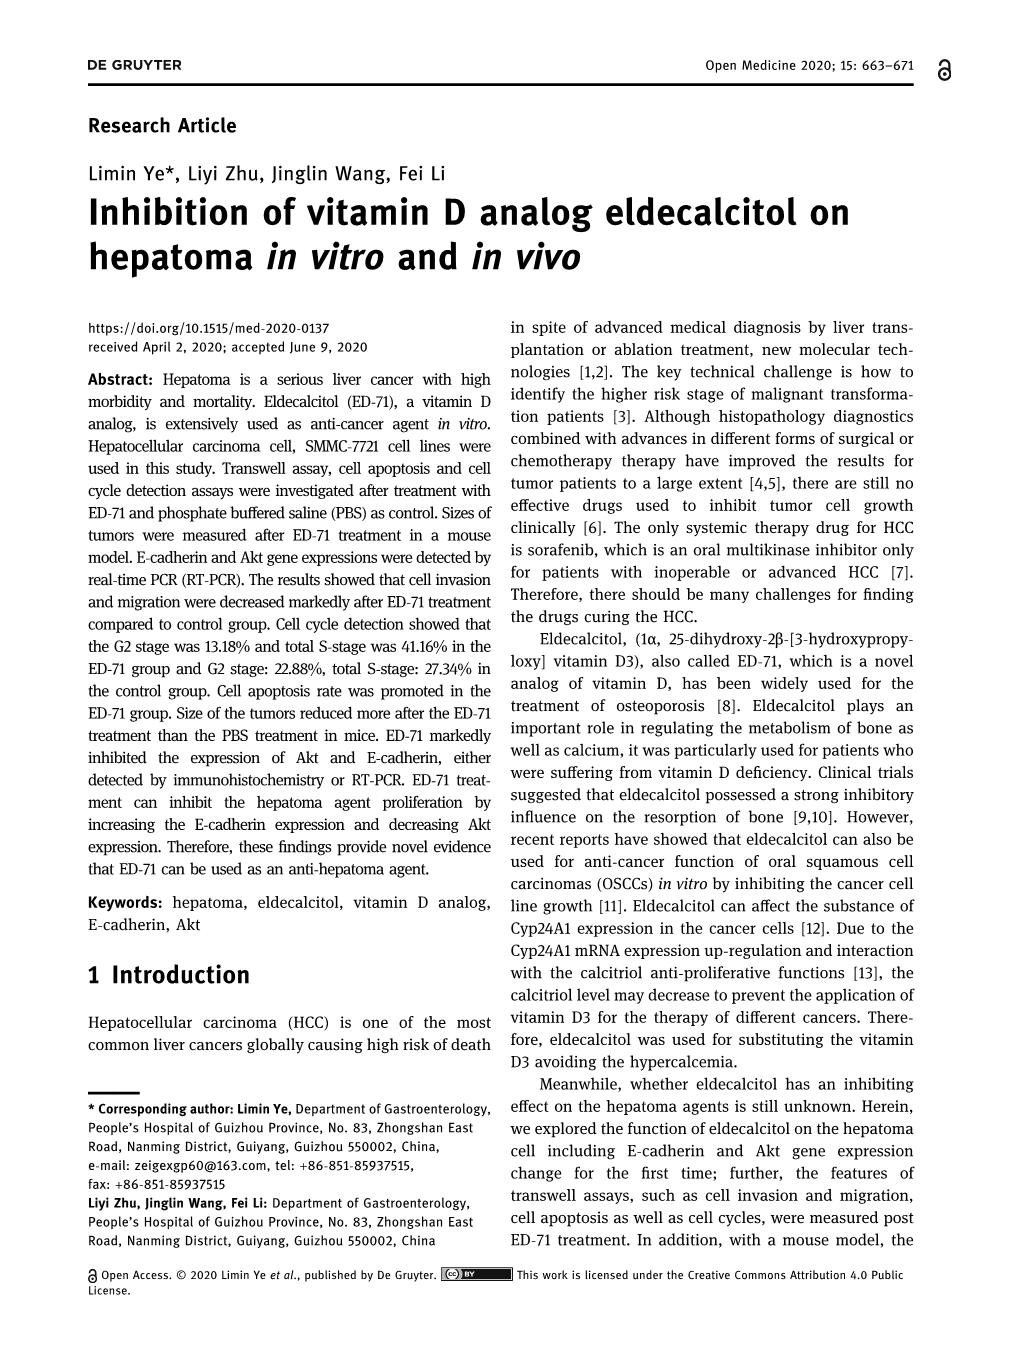 Inhibition of Vitamin D Analog Eldecalcitol on Hepatoma in Vitro and in Vivo